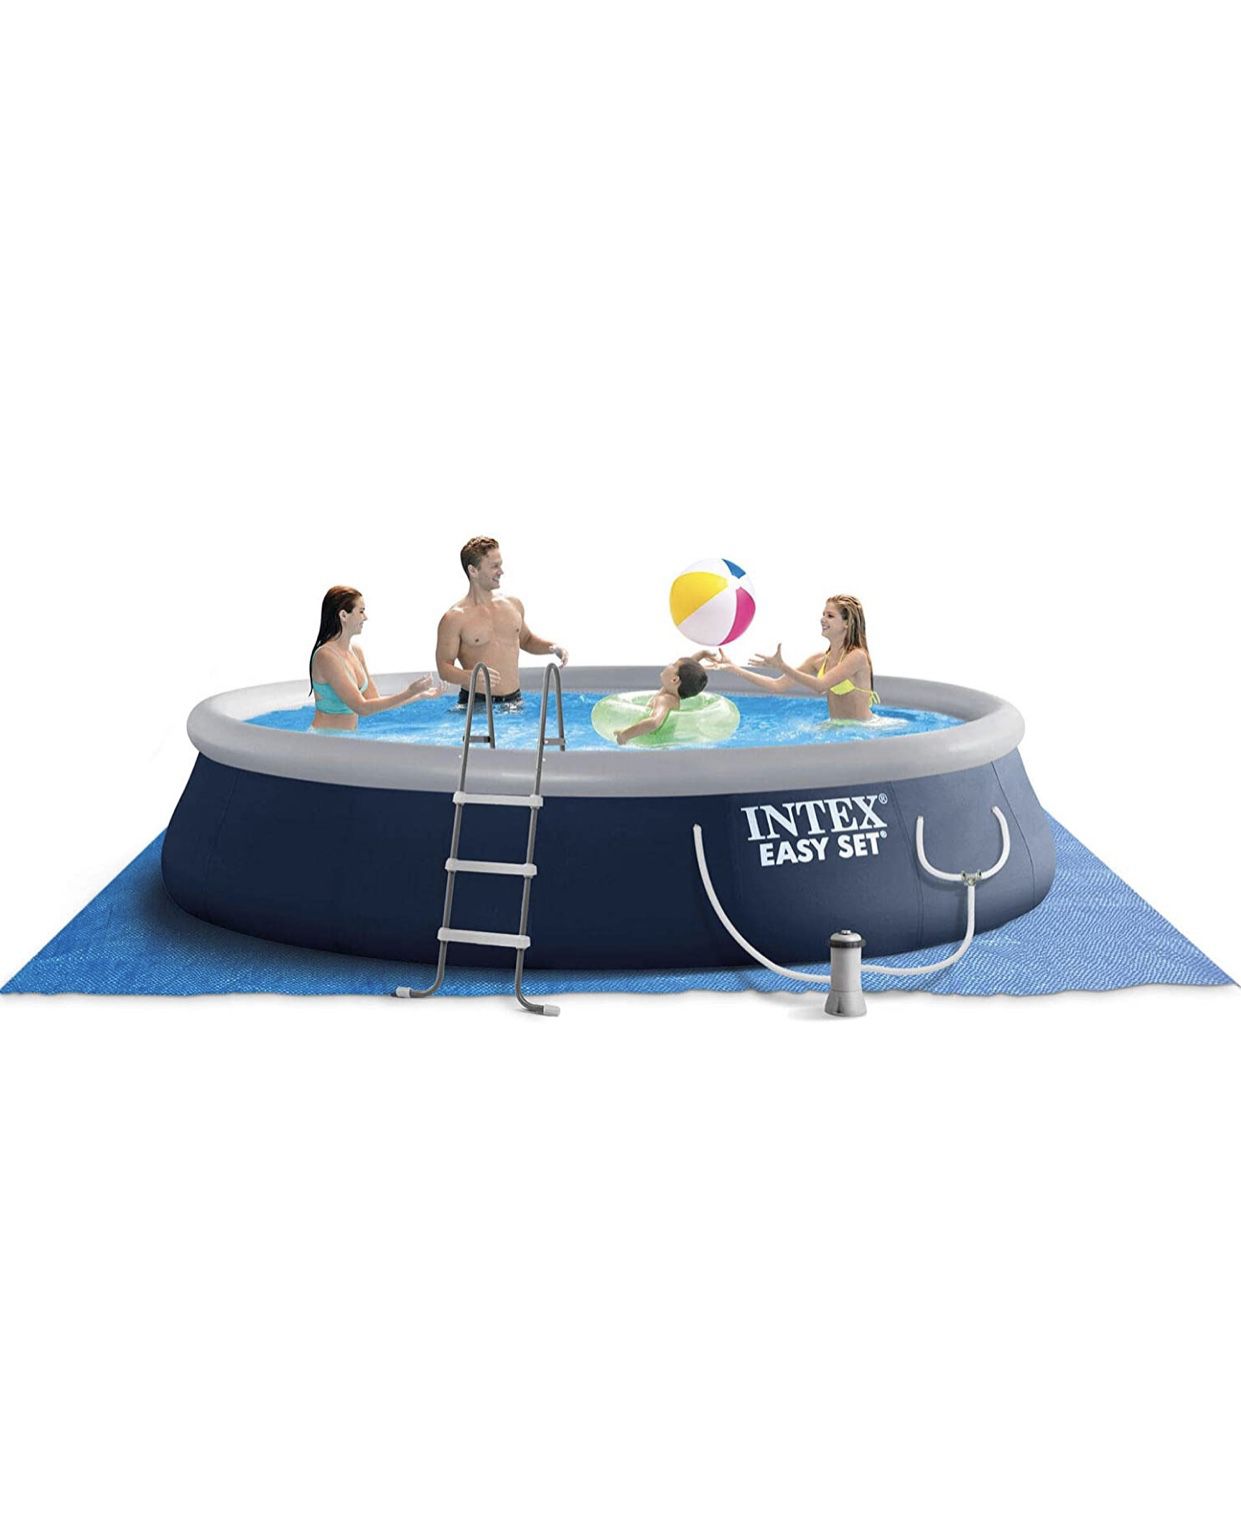 Intex 15 ft x 42” easy set inflatable above ground swimming pool. New in box! Comes with ladder and pump. Retails $1,000. Asking $650 + sales tax